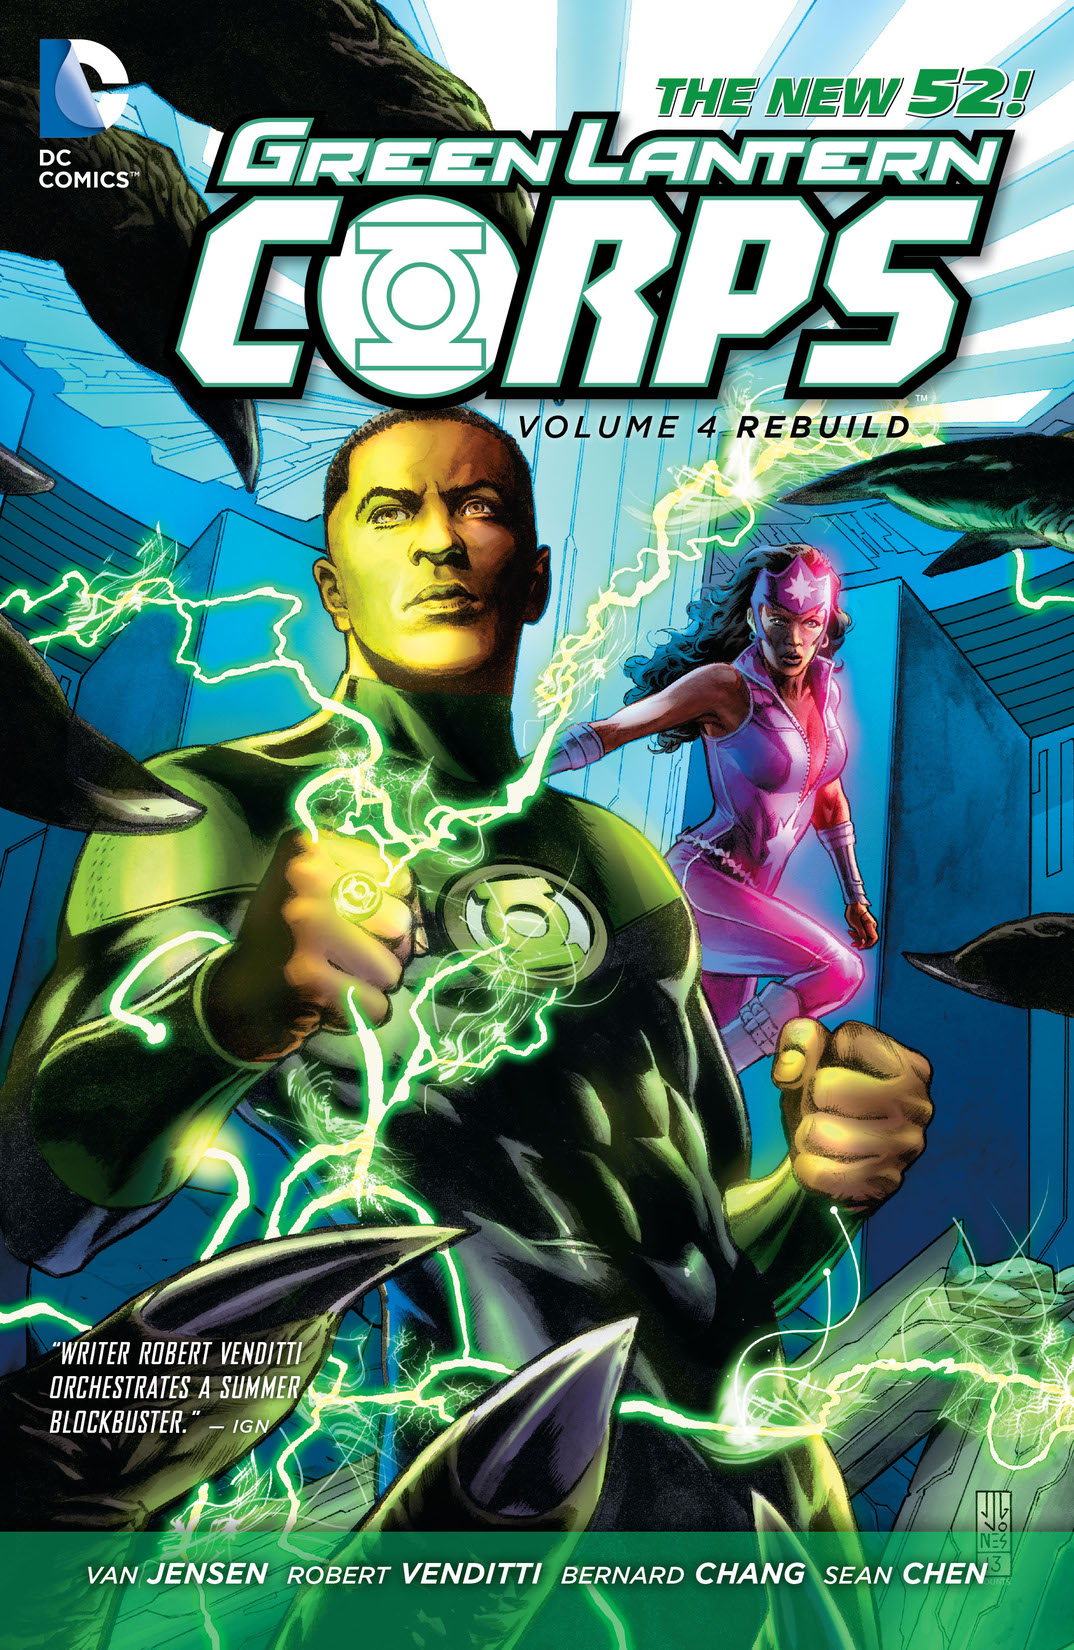 Green Lantern Corps Vol. 4: Rebuild preview images